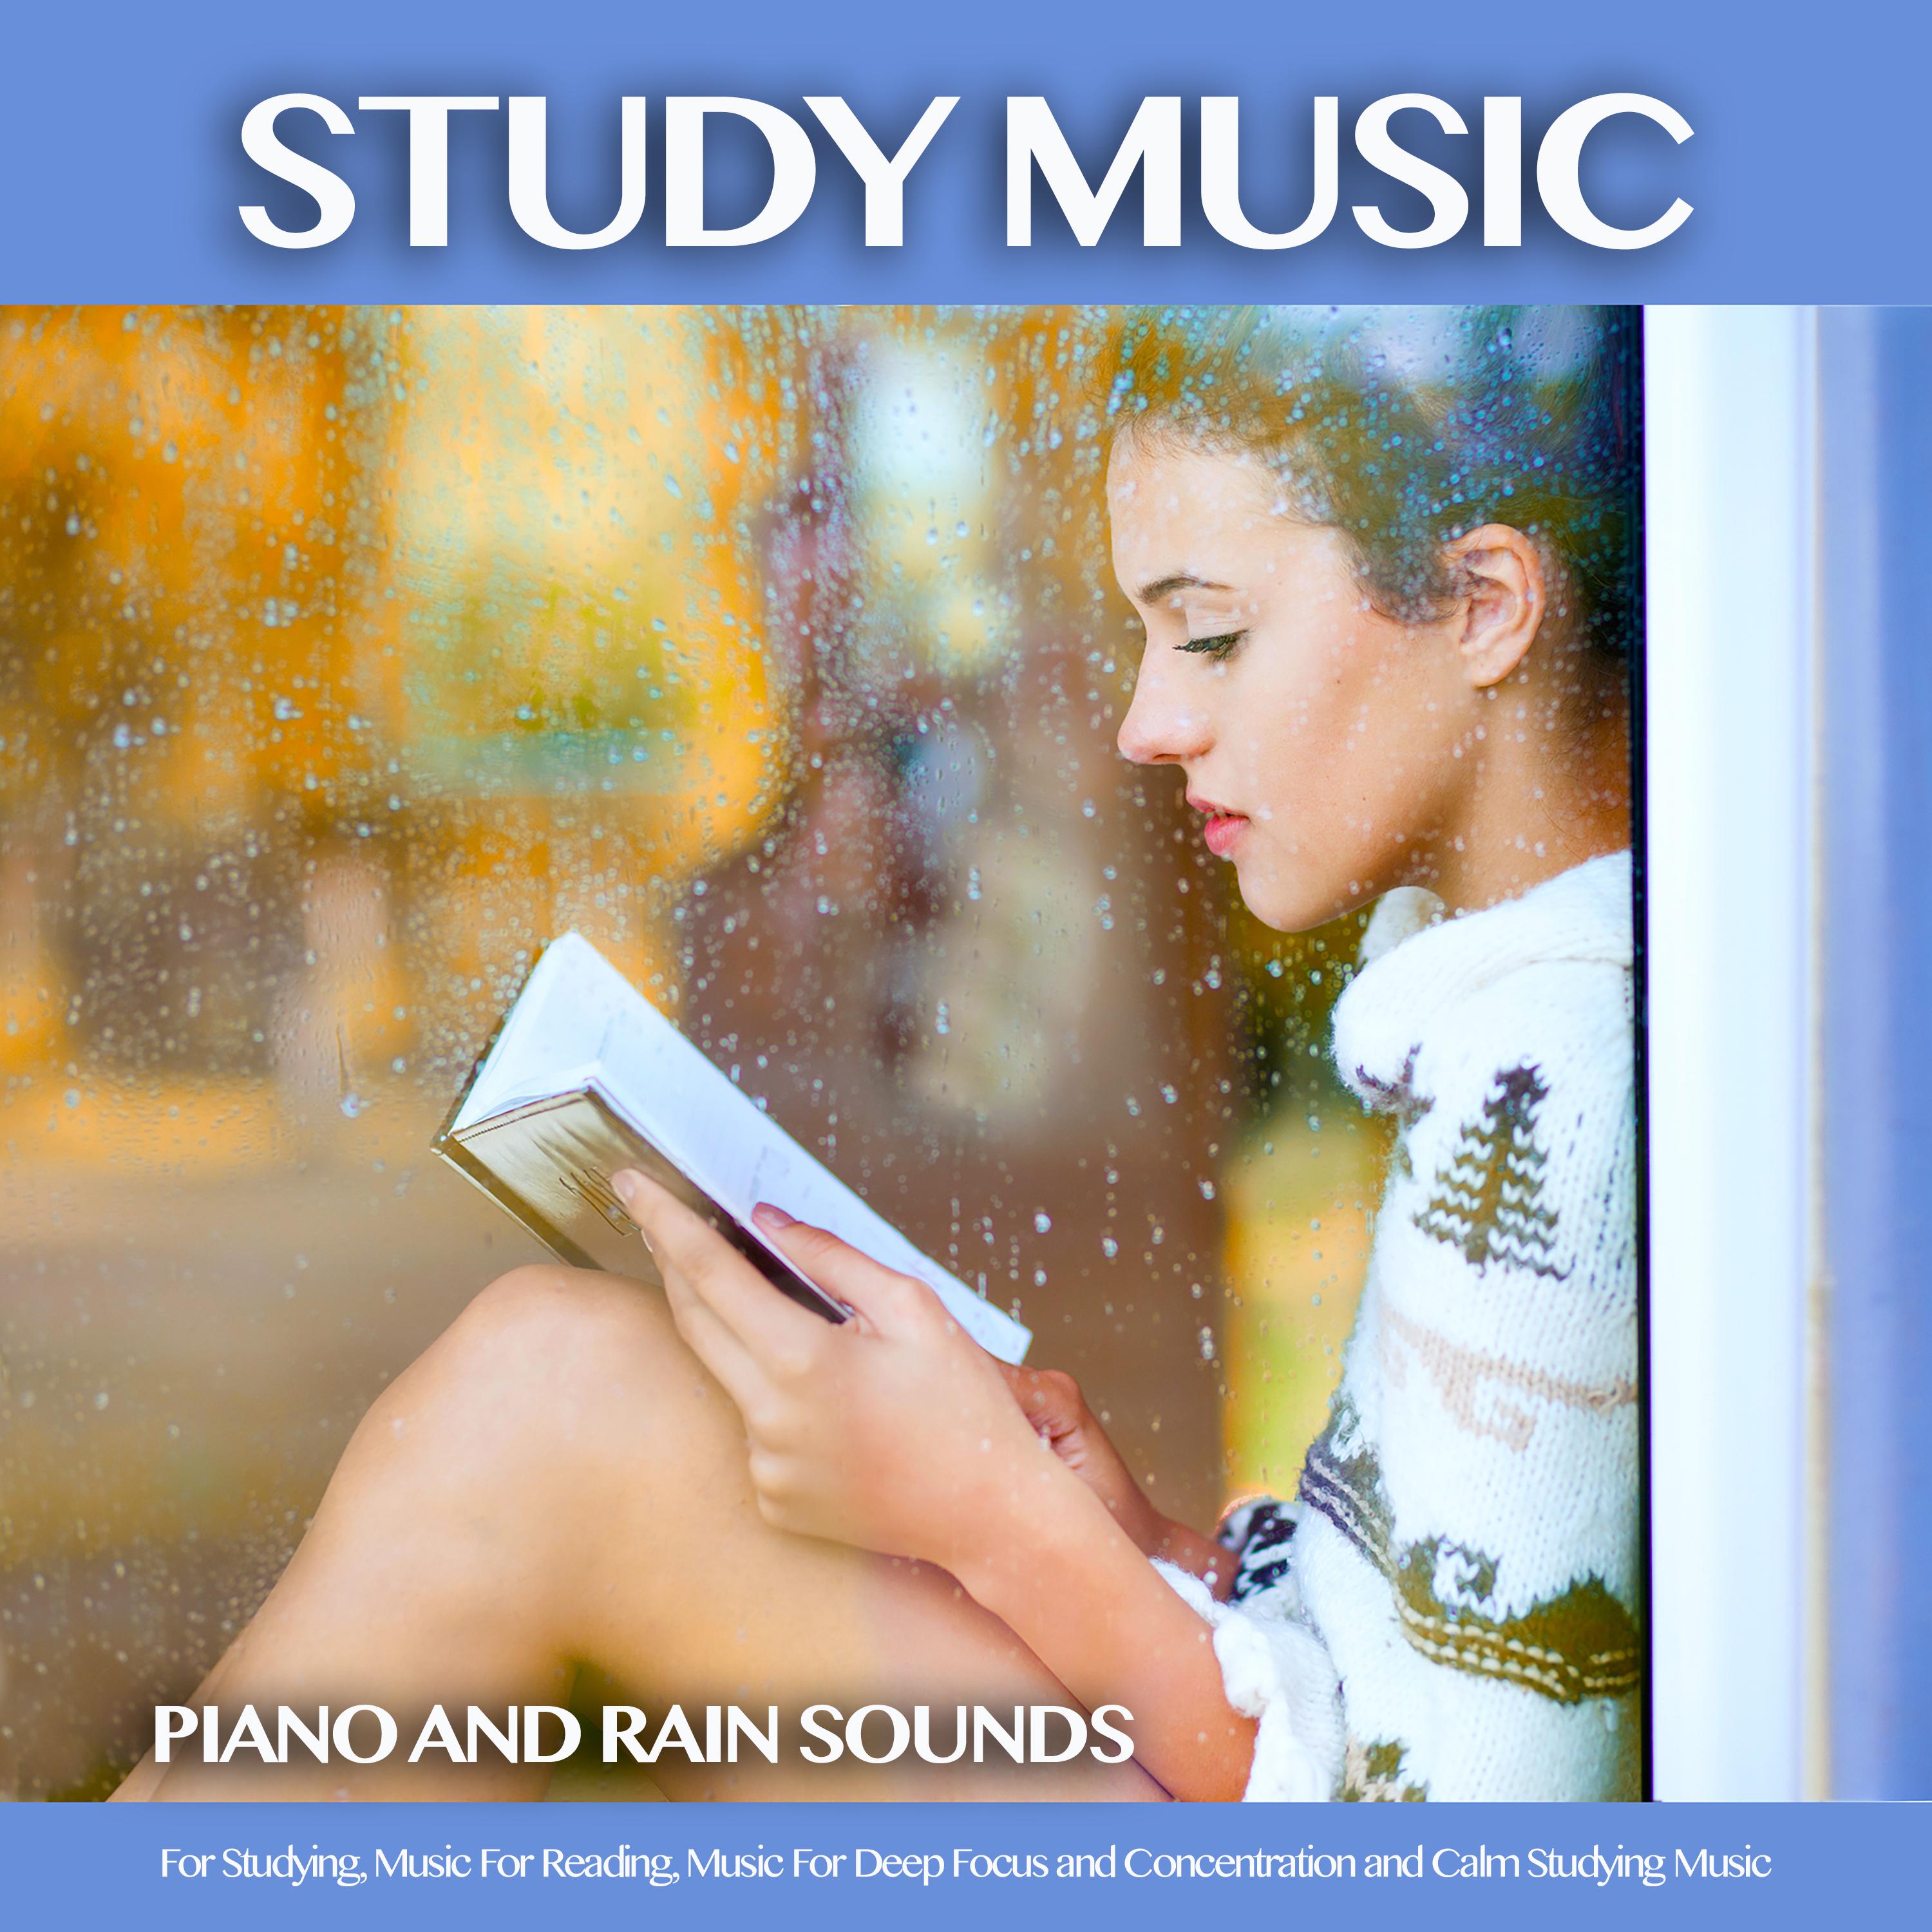 Ambient Piano Music To Help You Study